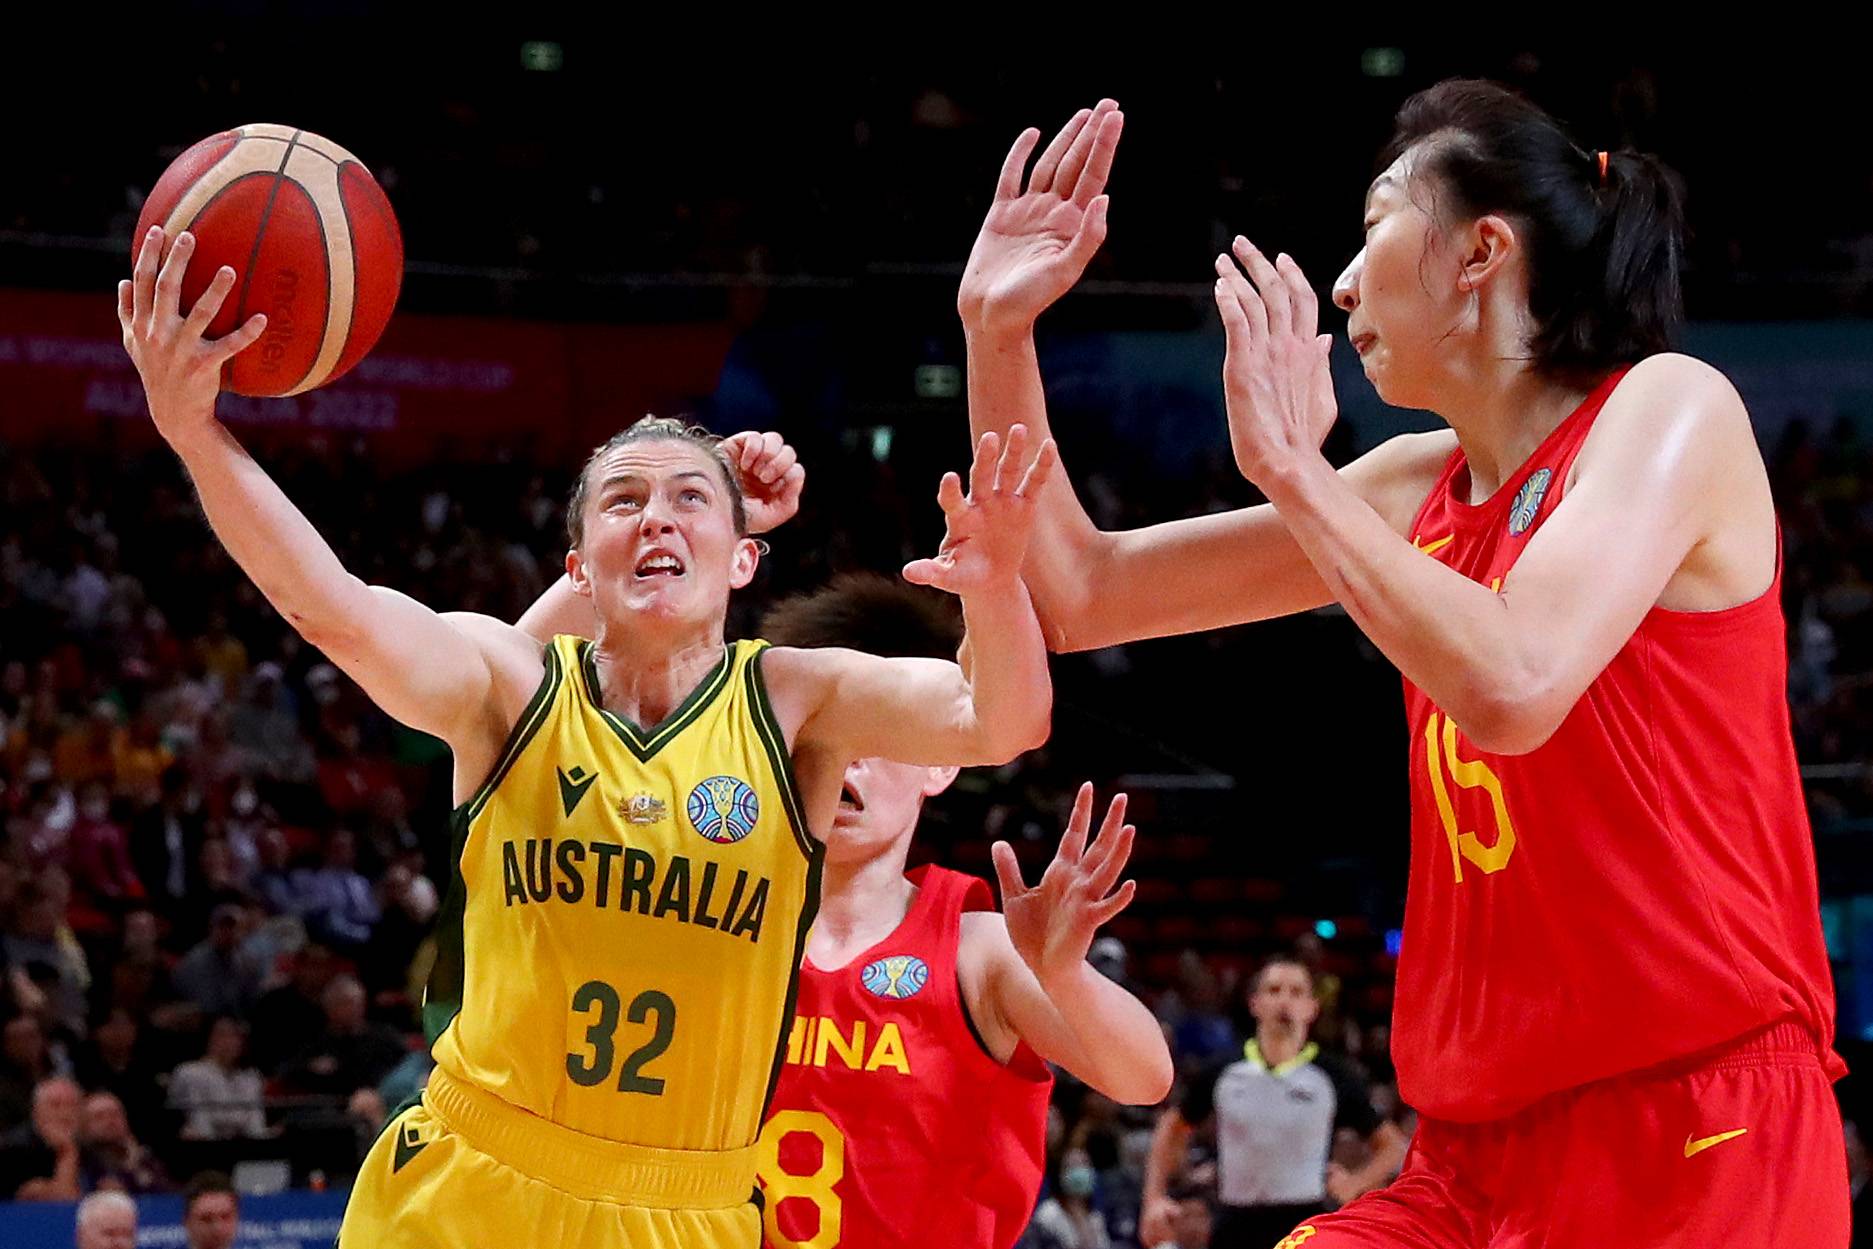 SYDNEY, AUSTRALIA - SEPTEMBER 30: Xu Han of China blocks Samantha Whitcomb of Australia during the 2022 FIBA Women's Basketball World Cup Semi Final match between Australia and China at Sydney Superdome, on September 30, 2022, in Sydney, Australia. (Photo by Kelly Defina/Getty Images)